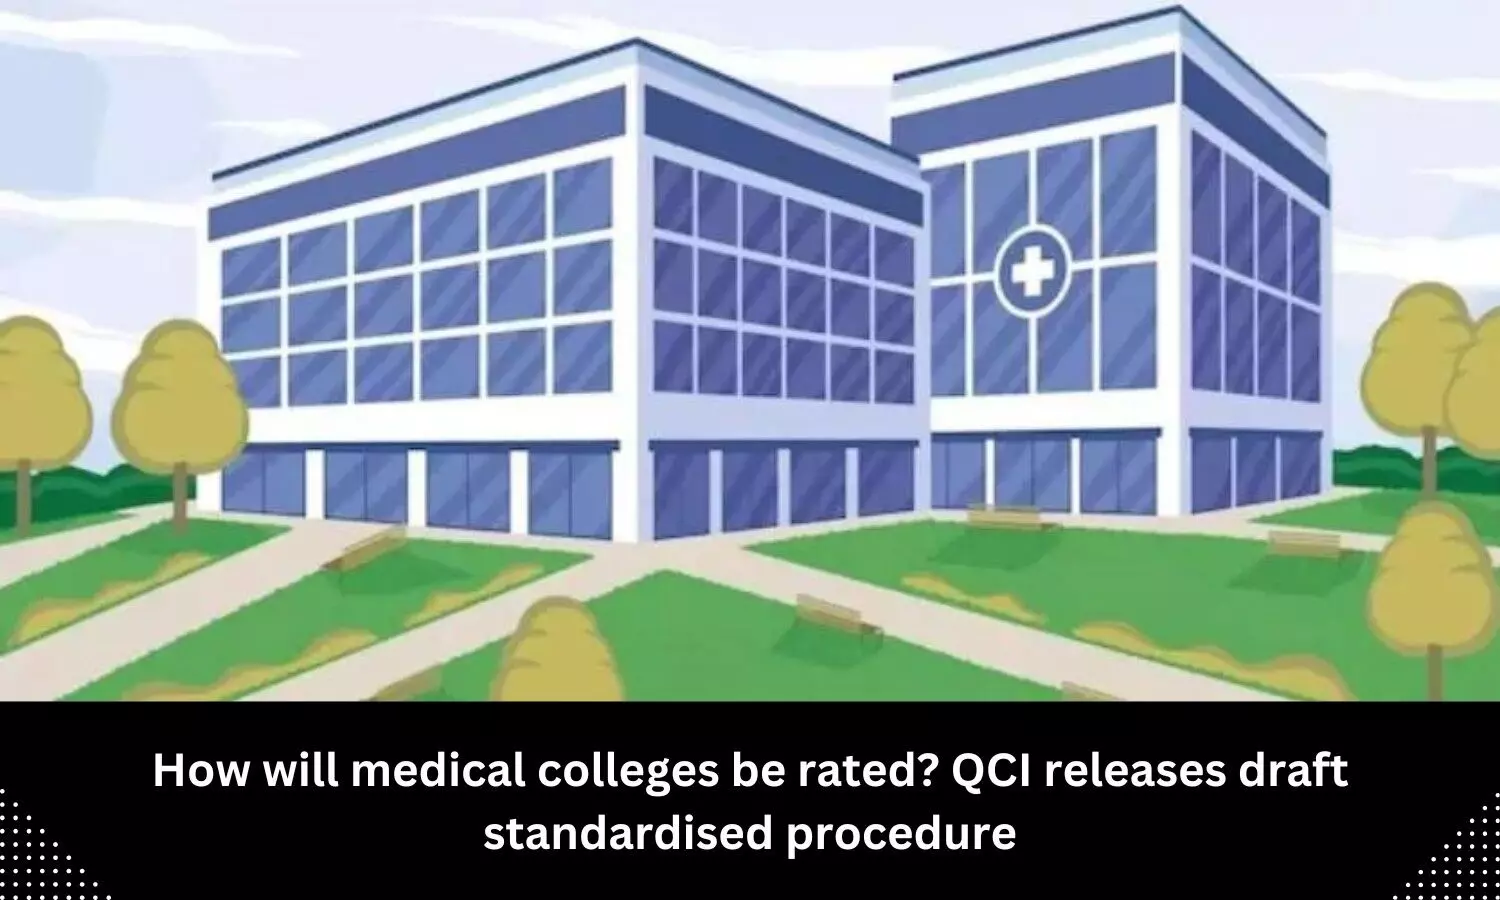 How will medical colleges be rated? QCI releases draft standardised procedure